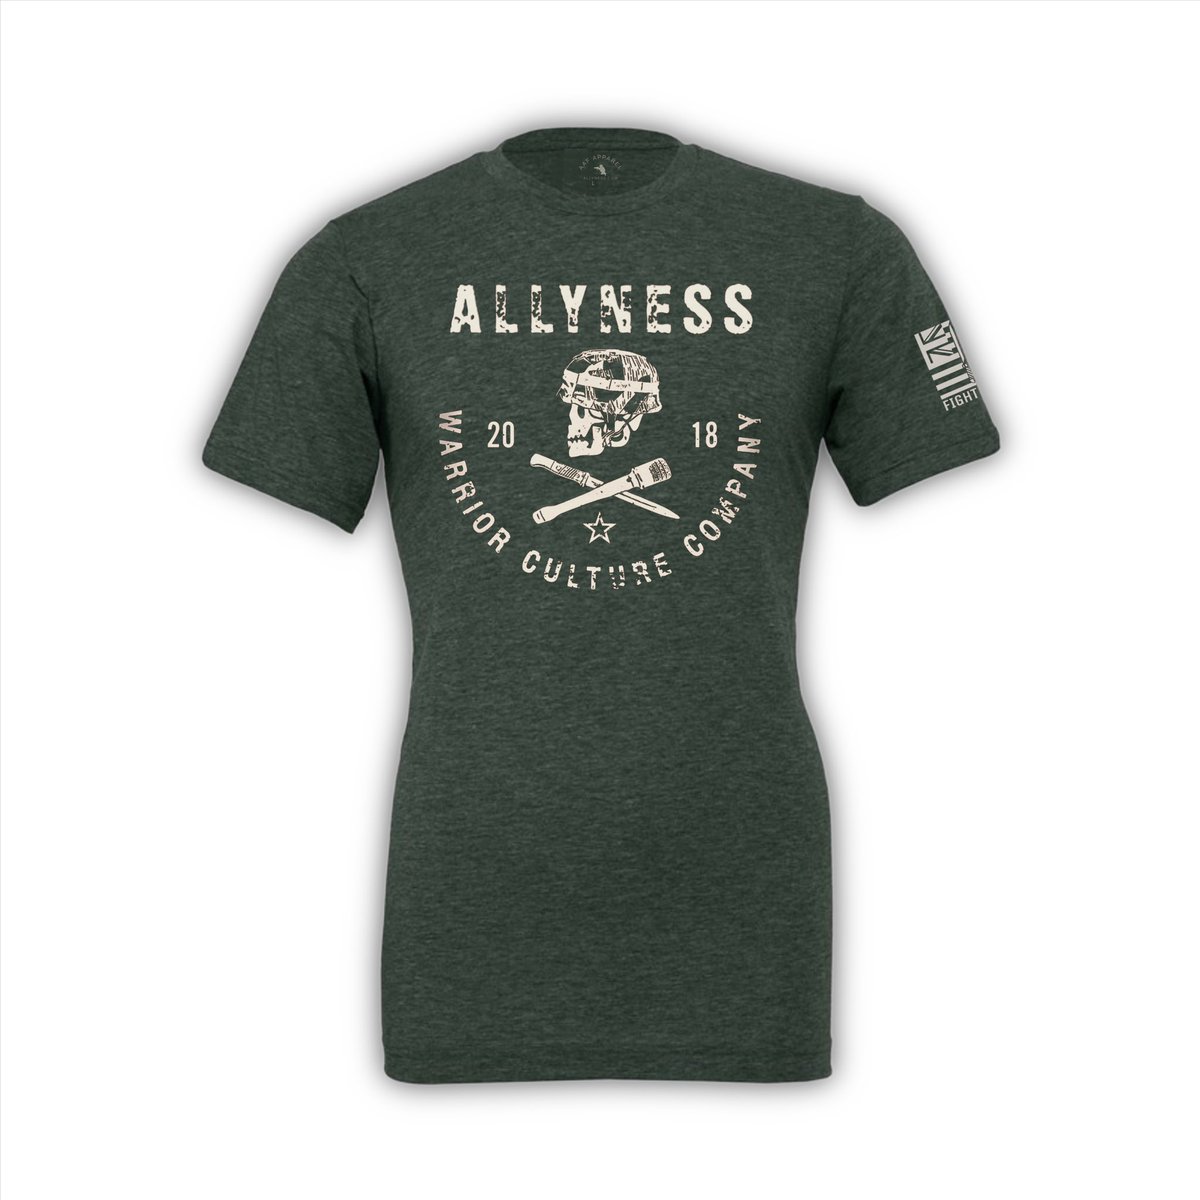 Don’t miss this one… ALLYNESS.COM